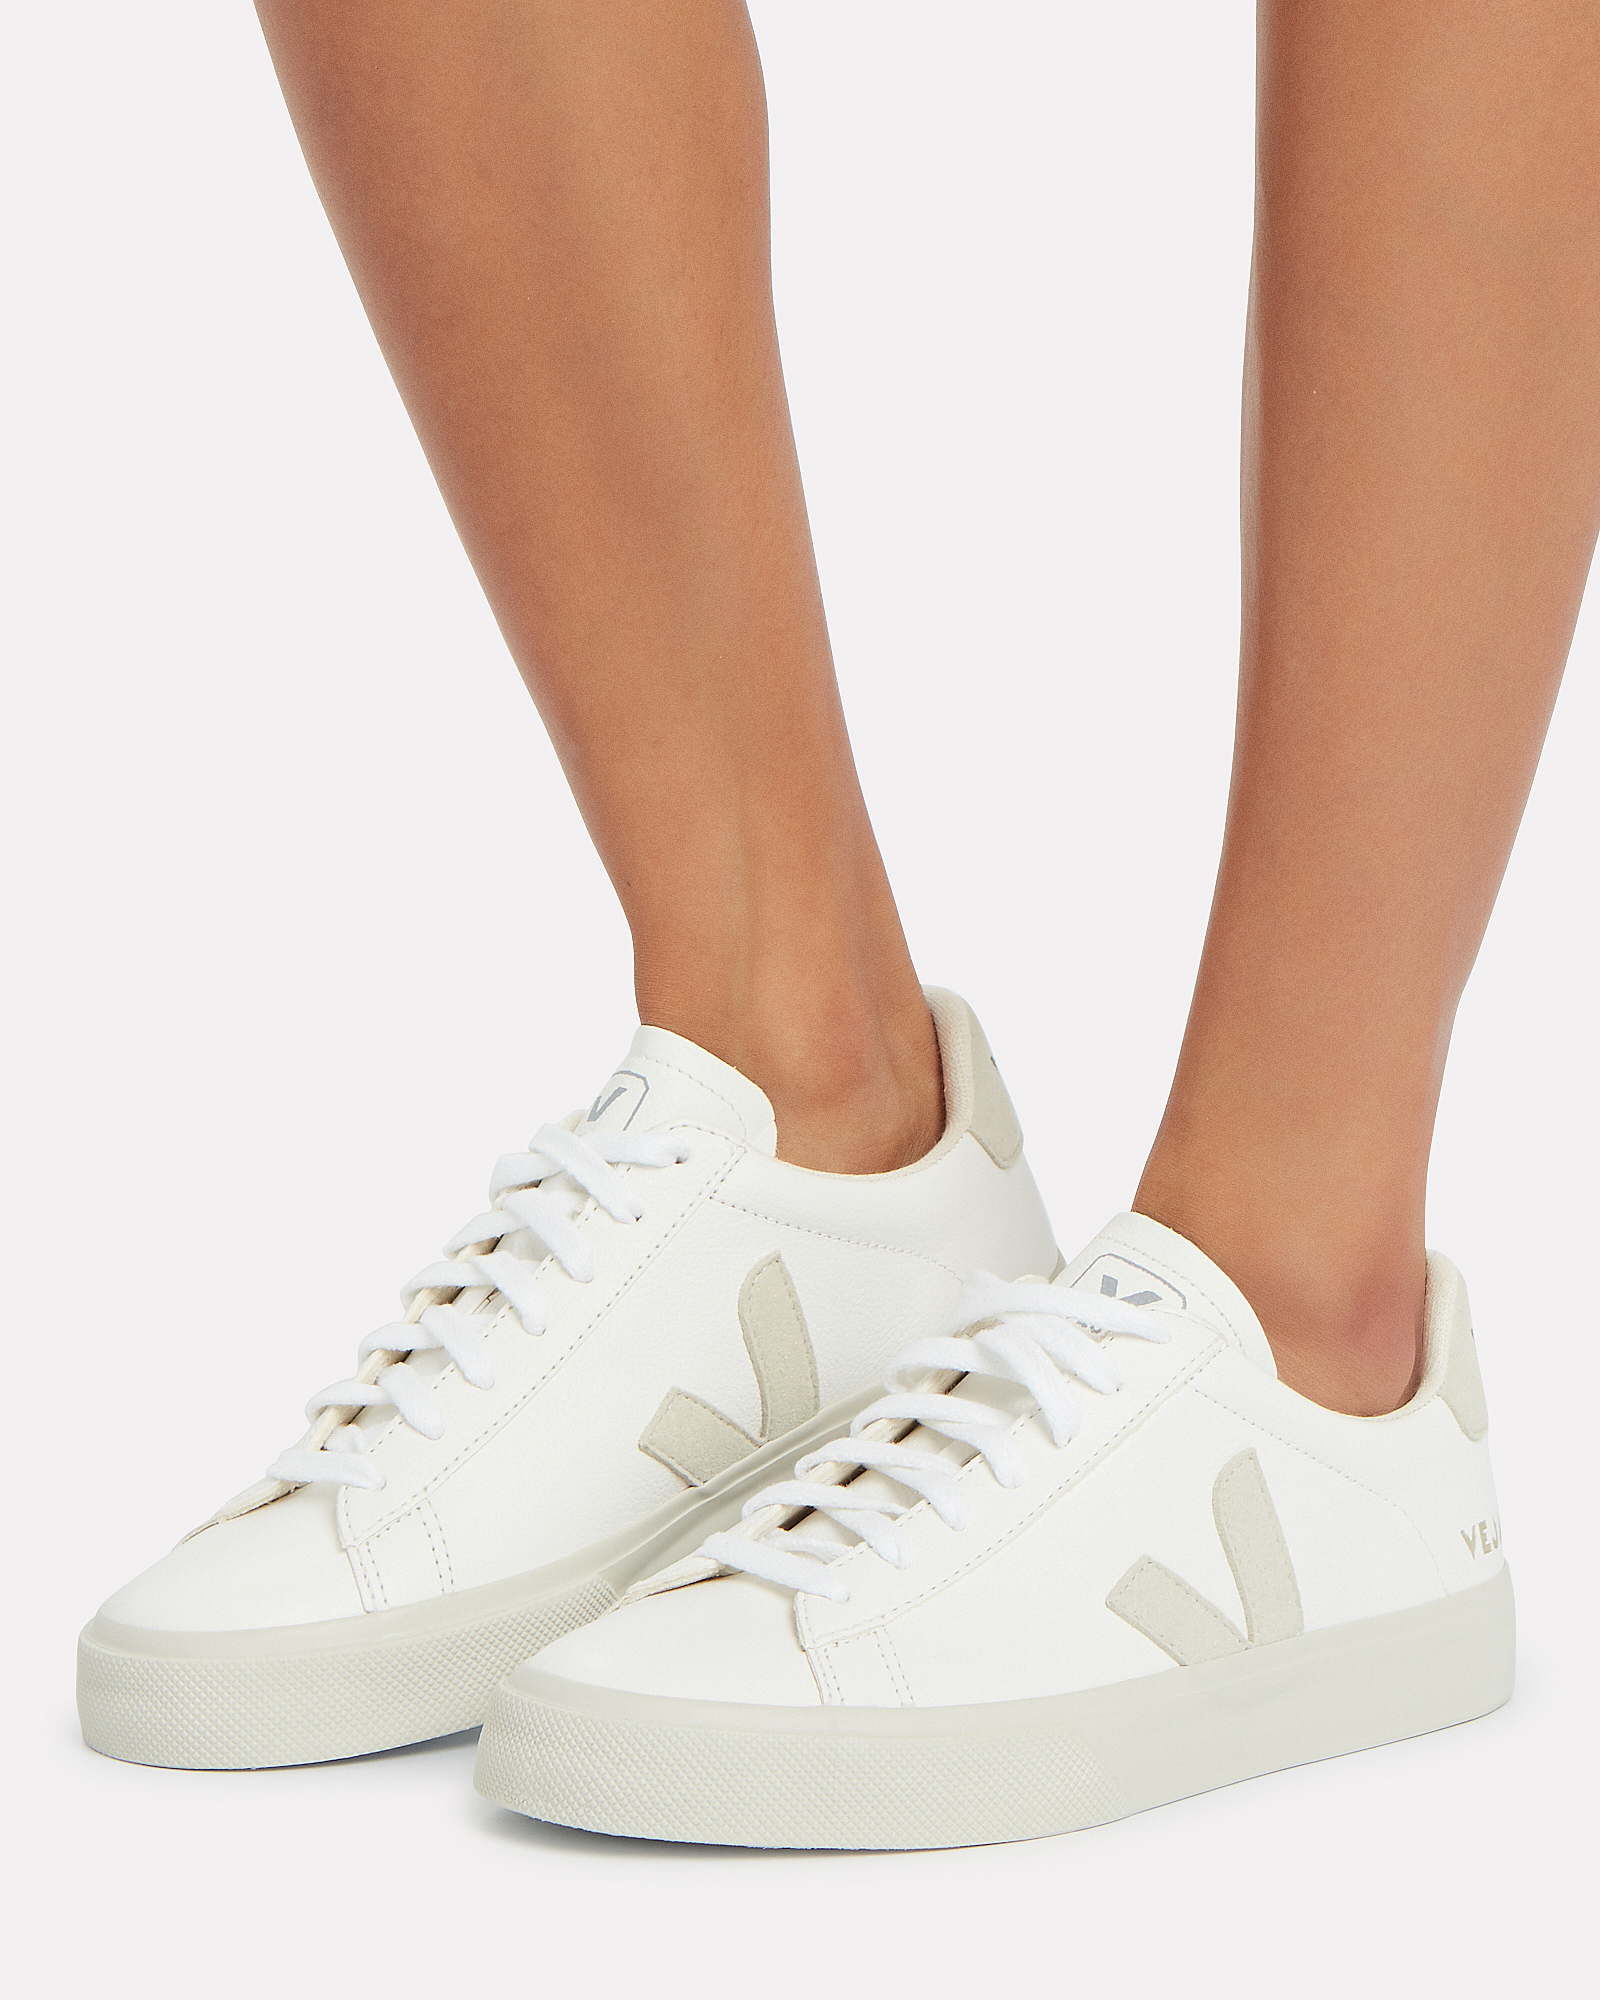 Veja | Campo Low-Top Sneakers | INTERMIX®